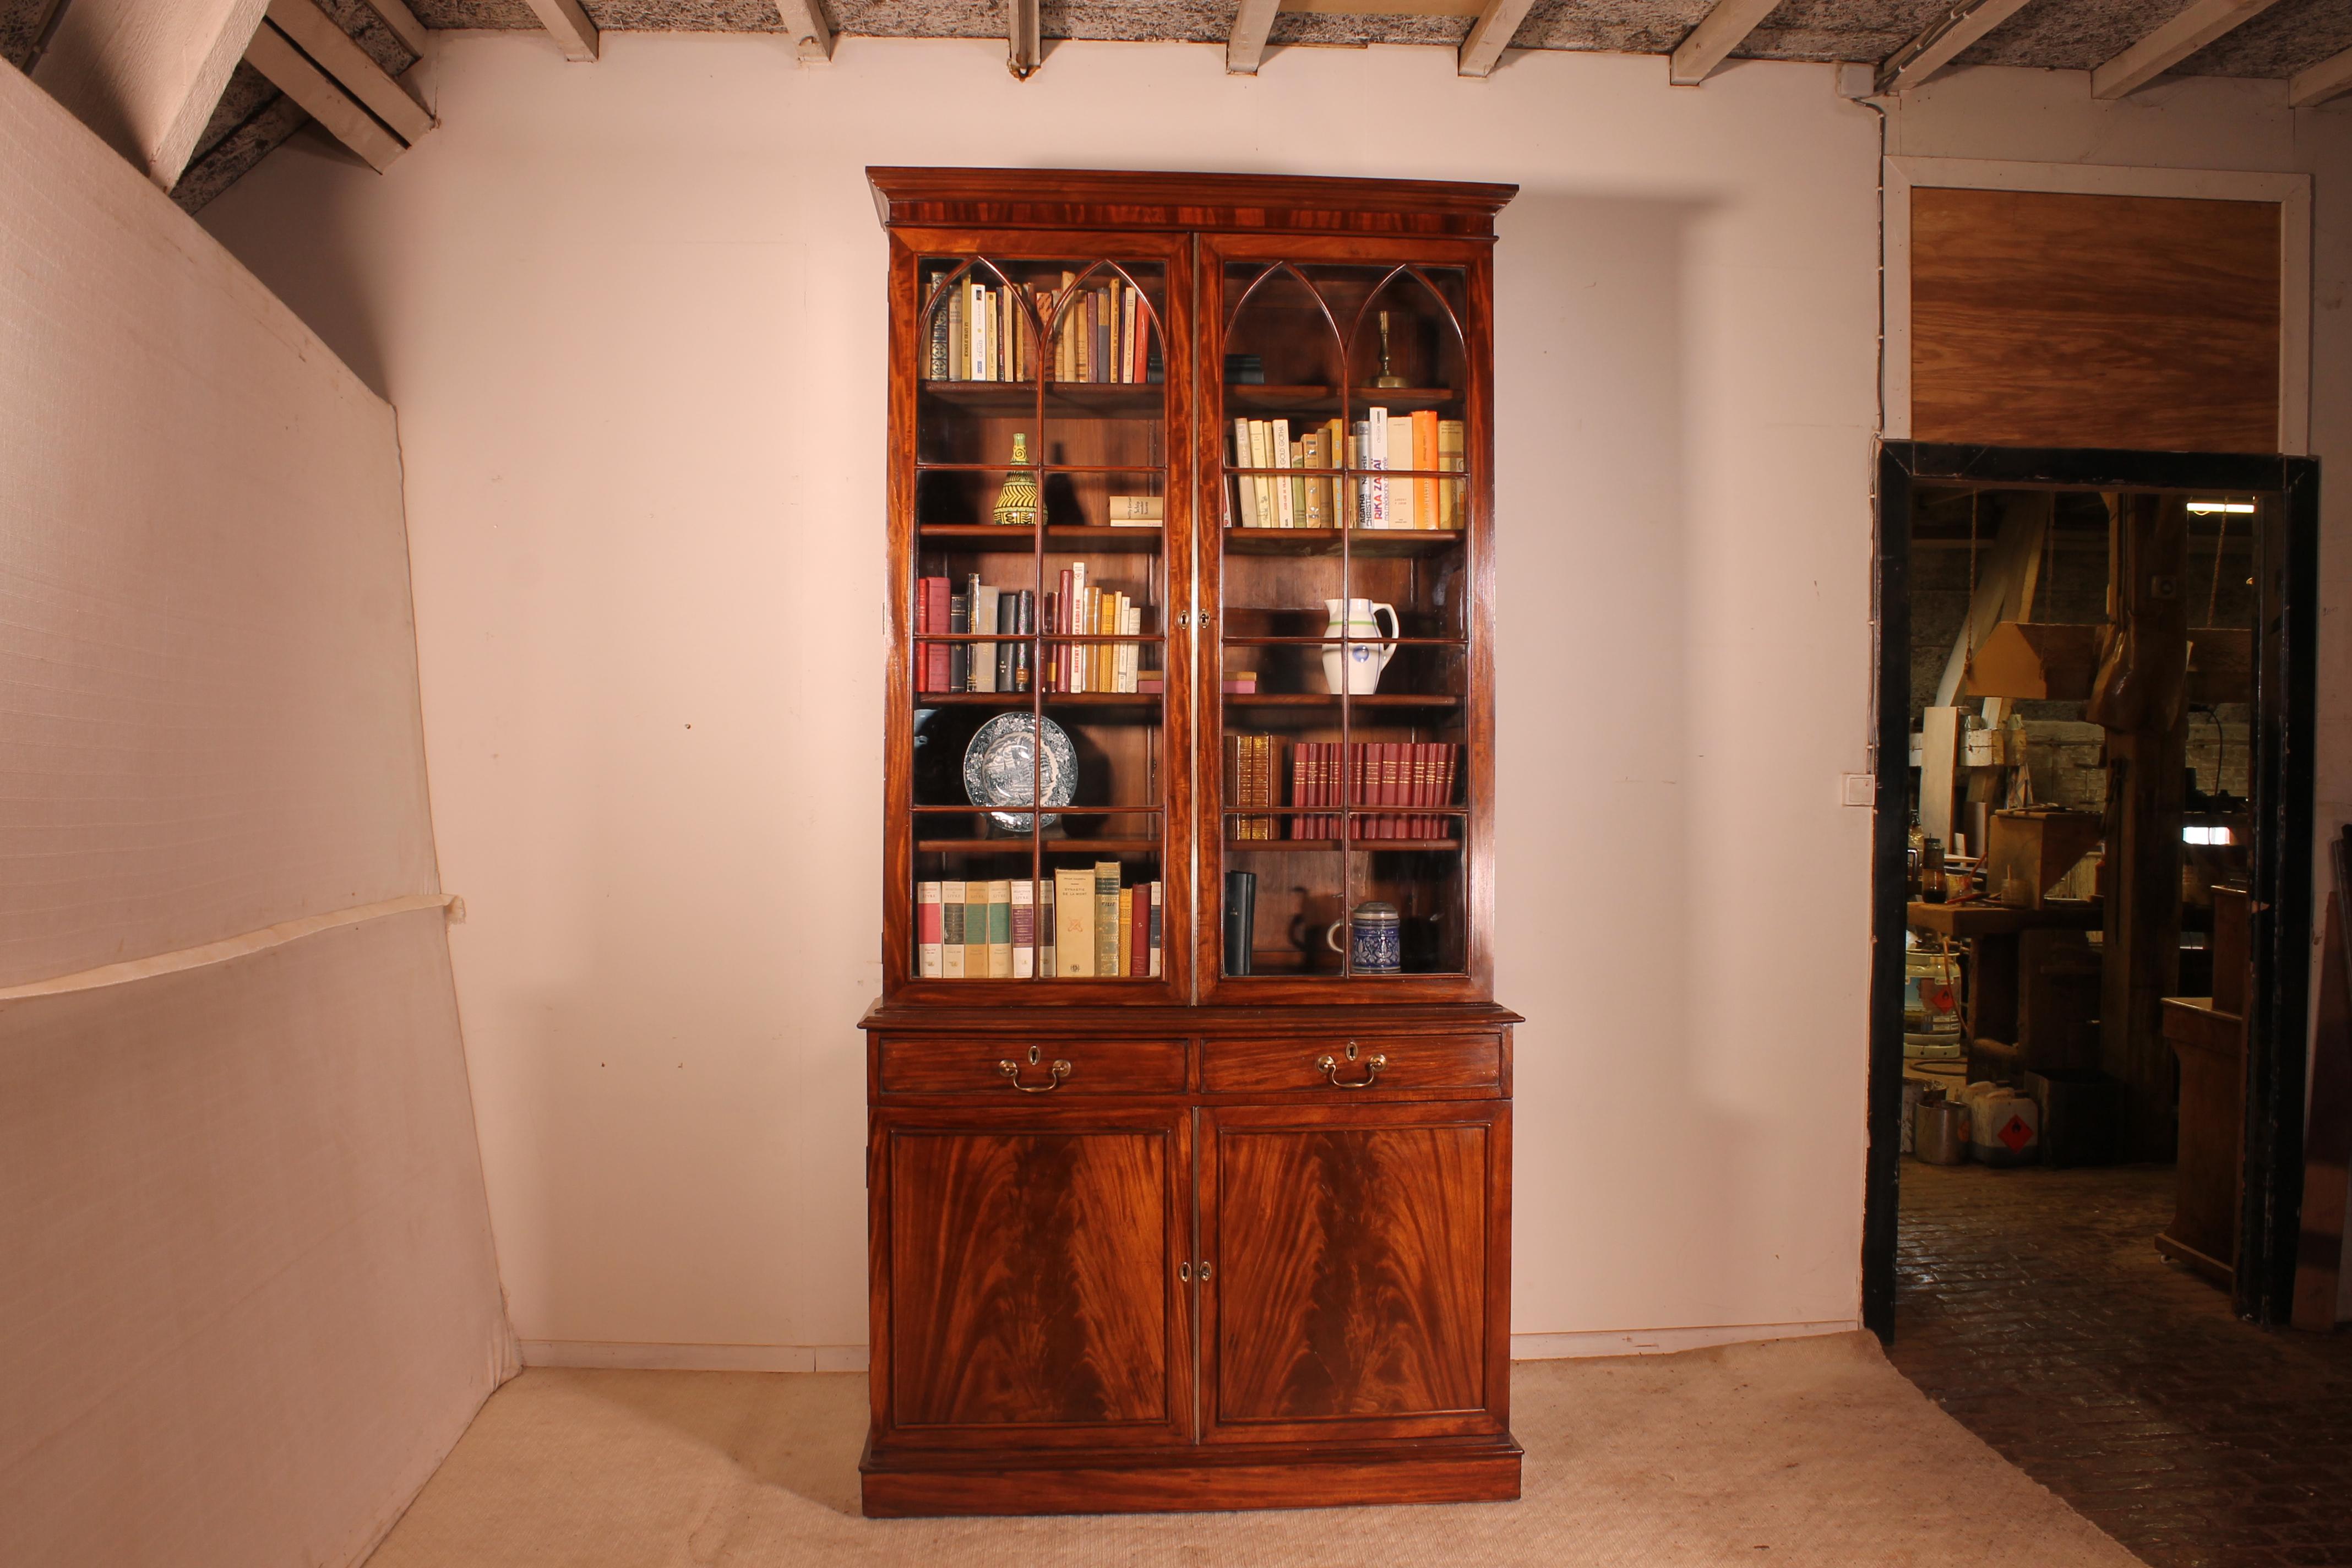 A fine English bookcase from the early 19th century regency period
English work from the early 19th century. The library stands out by its very good quality and its superb proportions

The bookcase is composed of two doors at the bottom, two